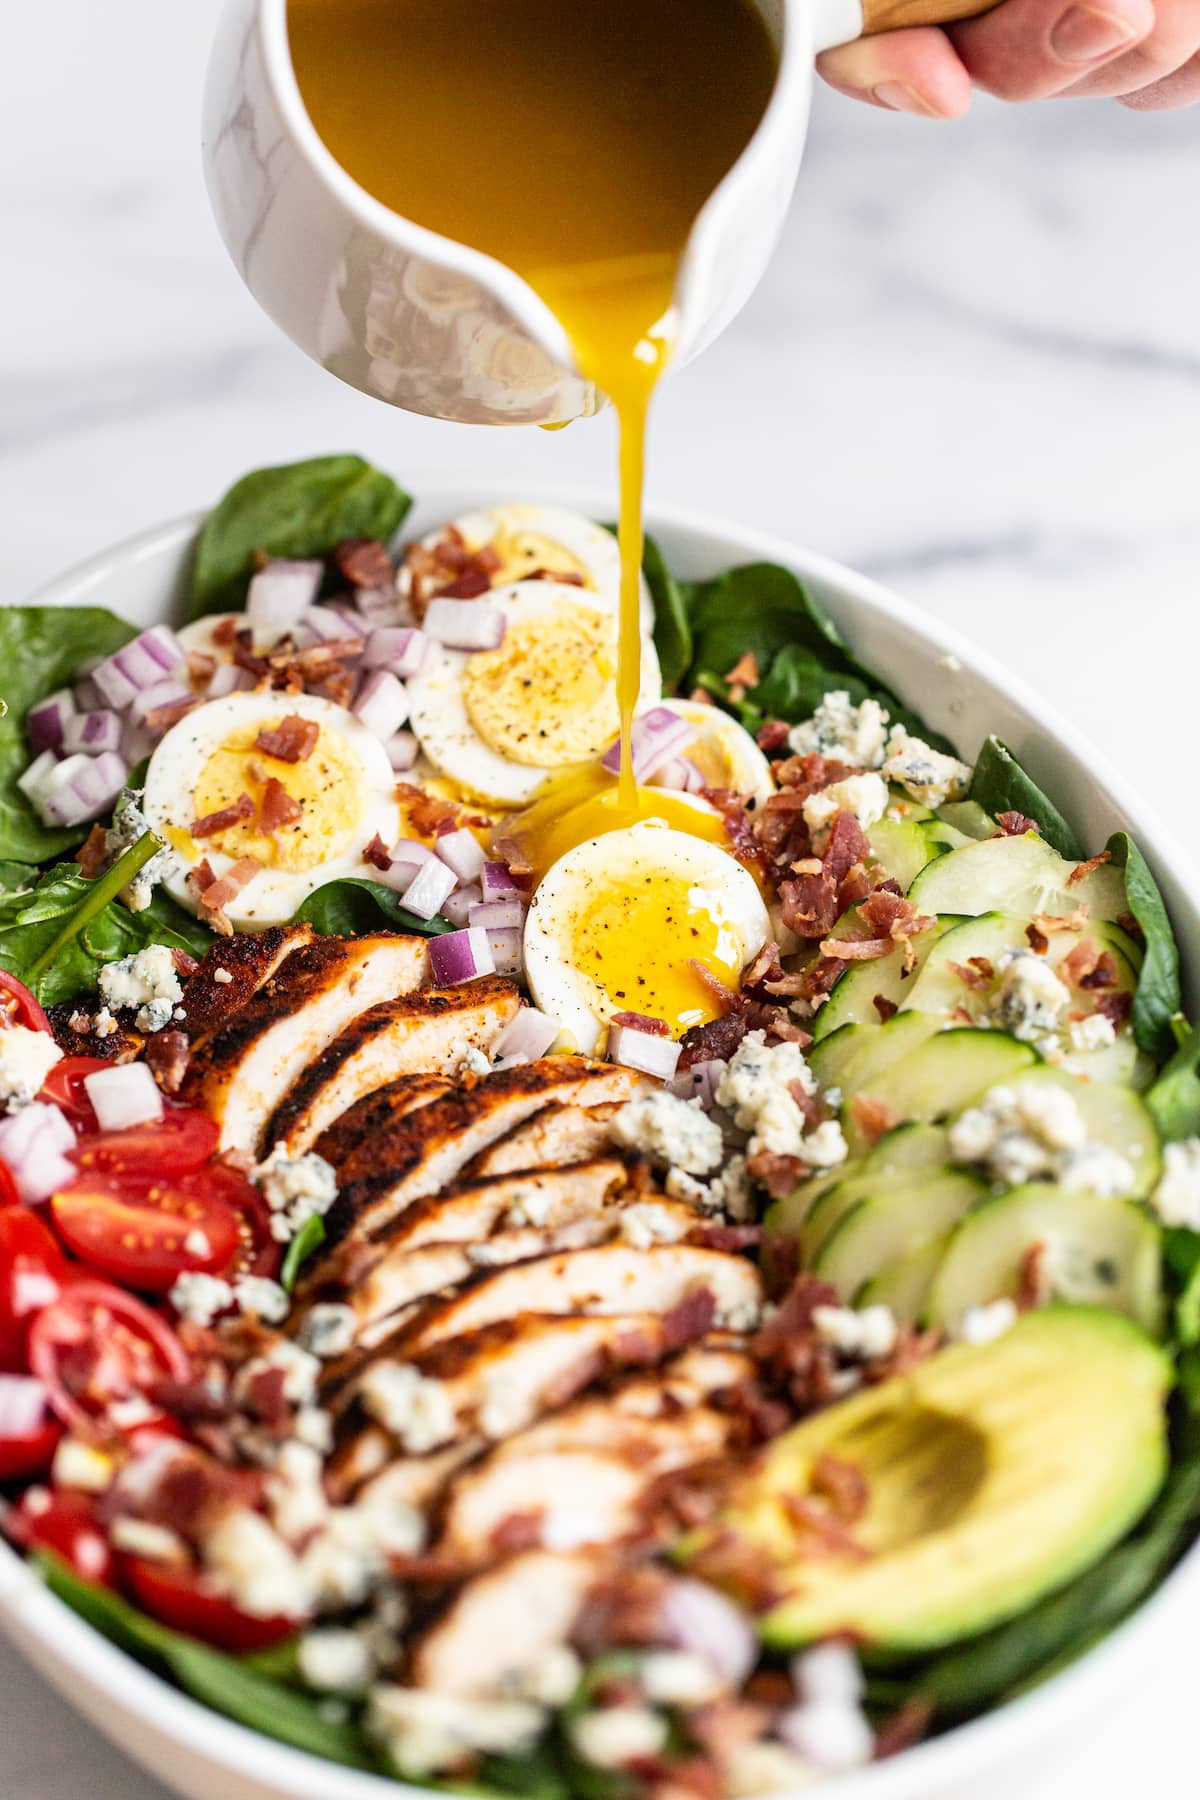 Pouring red wine vinaigrette dressing over a cobb salad made with spinach, egg, onion, bacon, blue cheese, cucumber, avocado, blackened chicken and tomatoes.